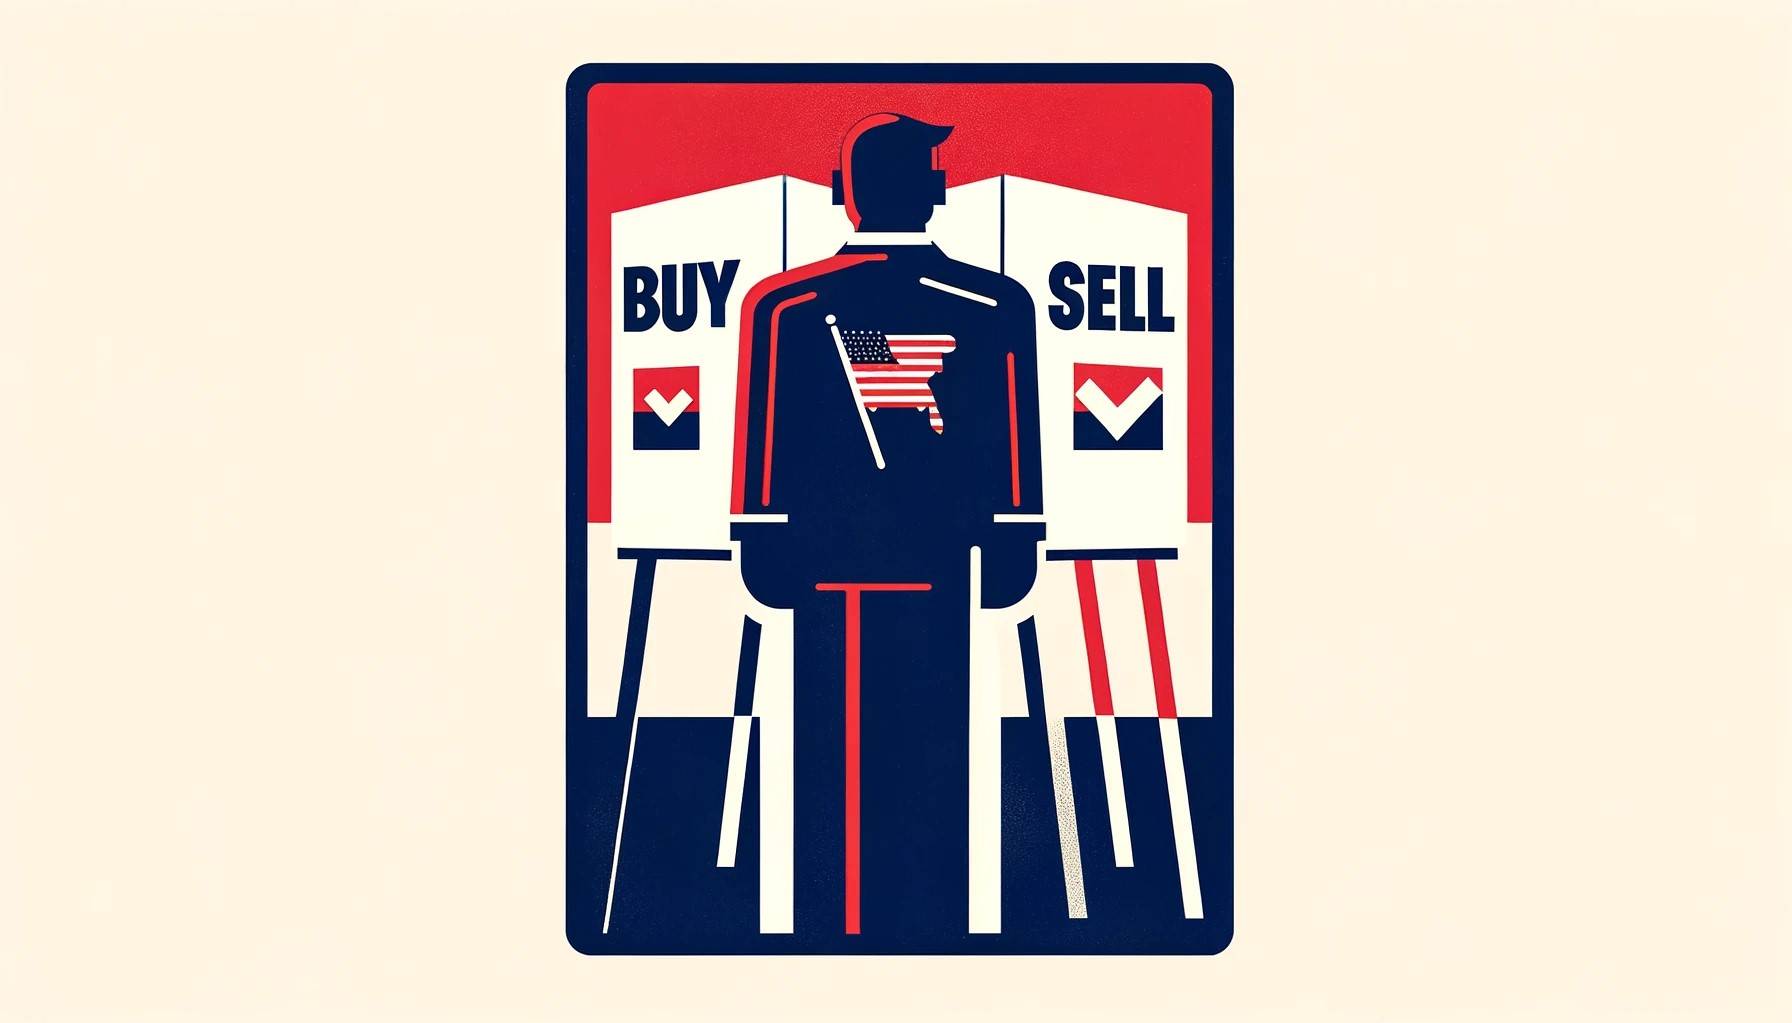 Minimalist illustration of a person in a voting booth, with red, white, and blue color scheme, choosing between 'buy' and 'sell' options to symbolize real estate decisions during election years.